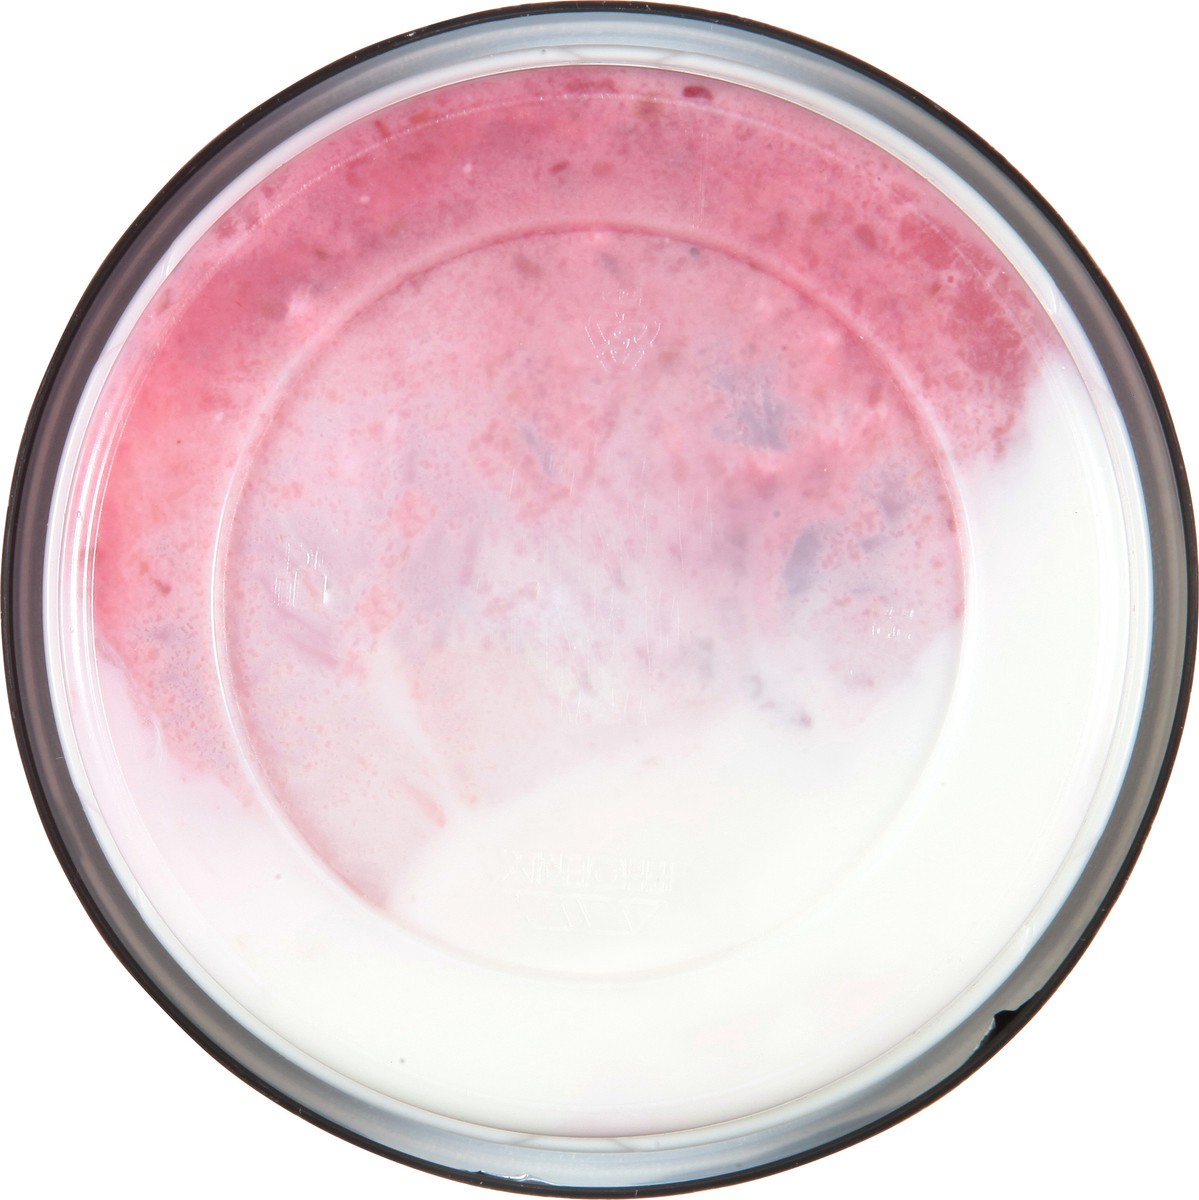 slide 3 of 9, noosa Yoghurt, Raspberry, 8 oz, Whole Milk Yogurt, Grade-A Pasteurized, Gluten Free, Probiotic, Made With the Finest Quality Ingredients, 8 oz